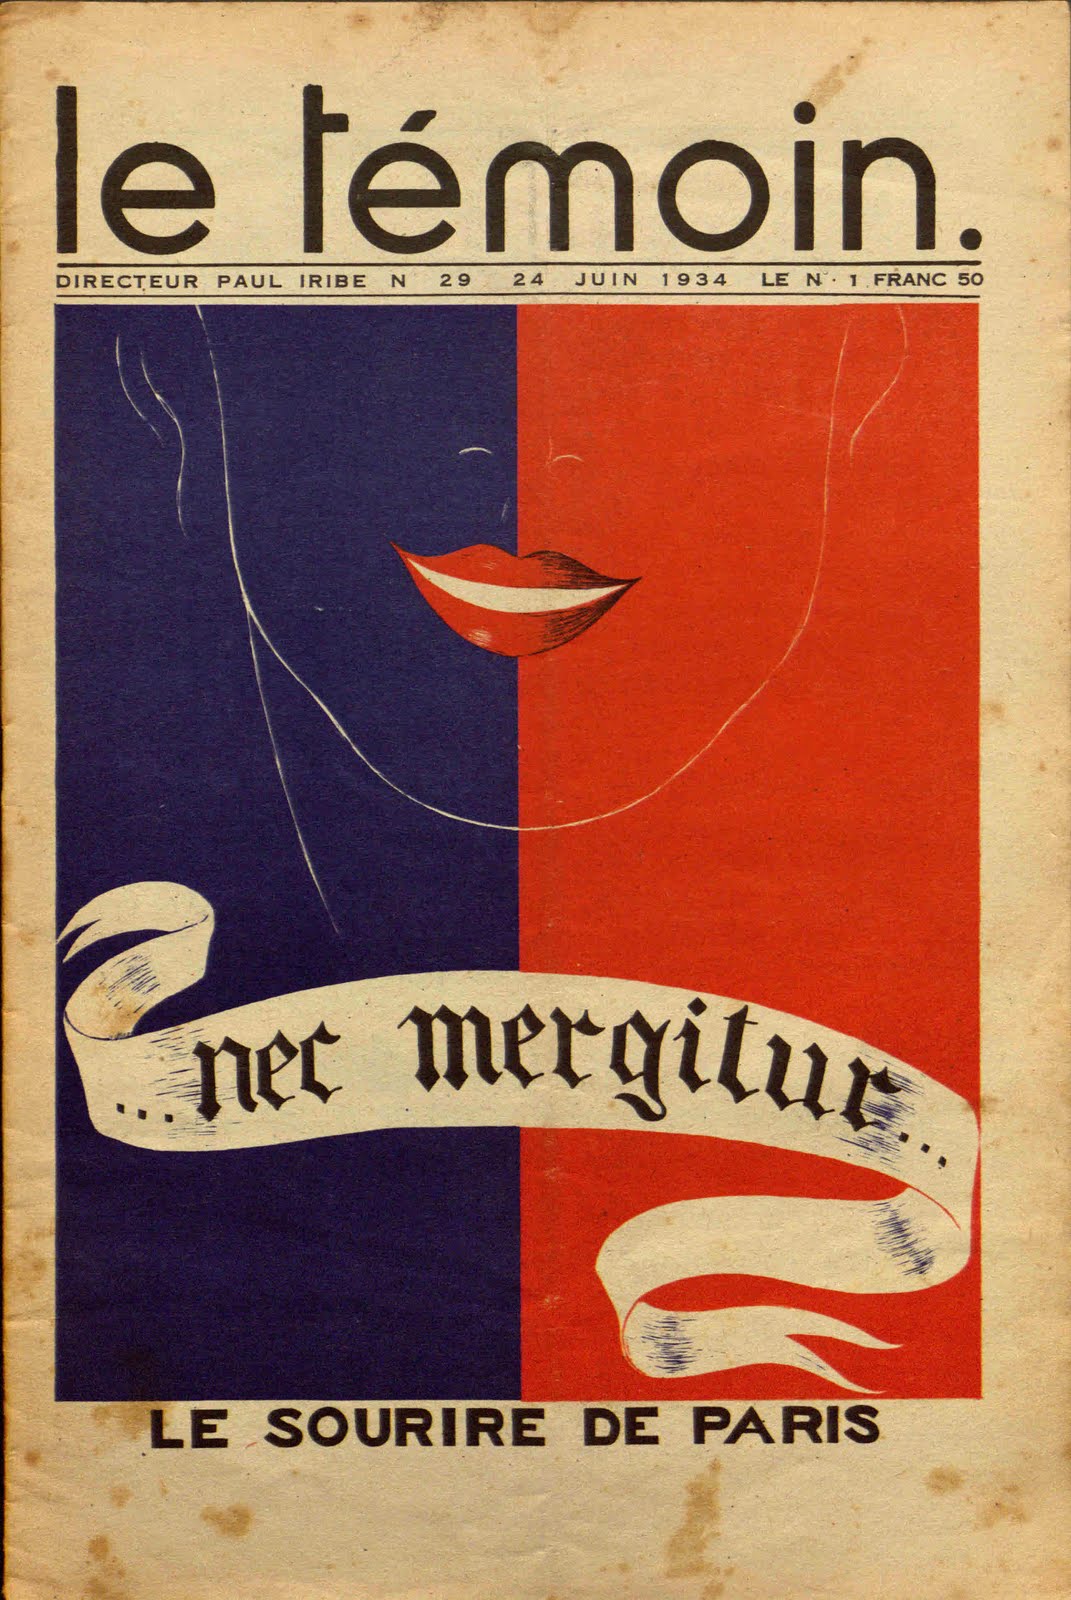 June 1934 cover for Le Temoin with a red and blue illustration of a woman's smile and the phrase "nec mergitur: le sourire de paris" OR "Tossed but not sunk: the smile of Paris"